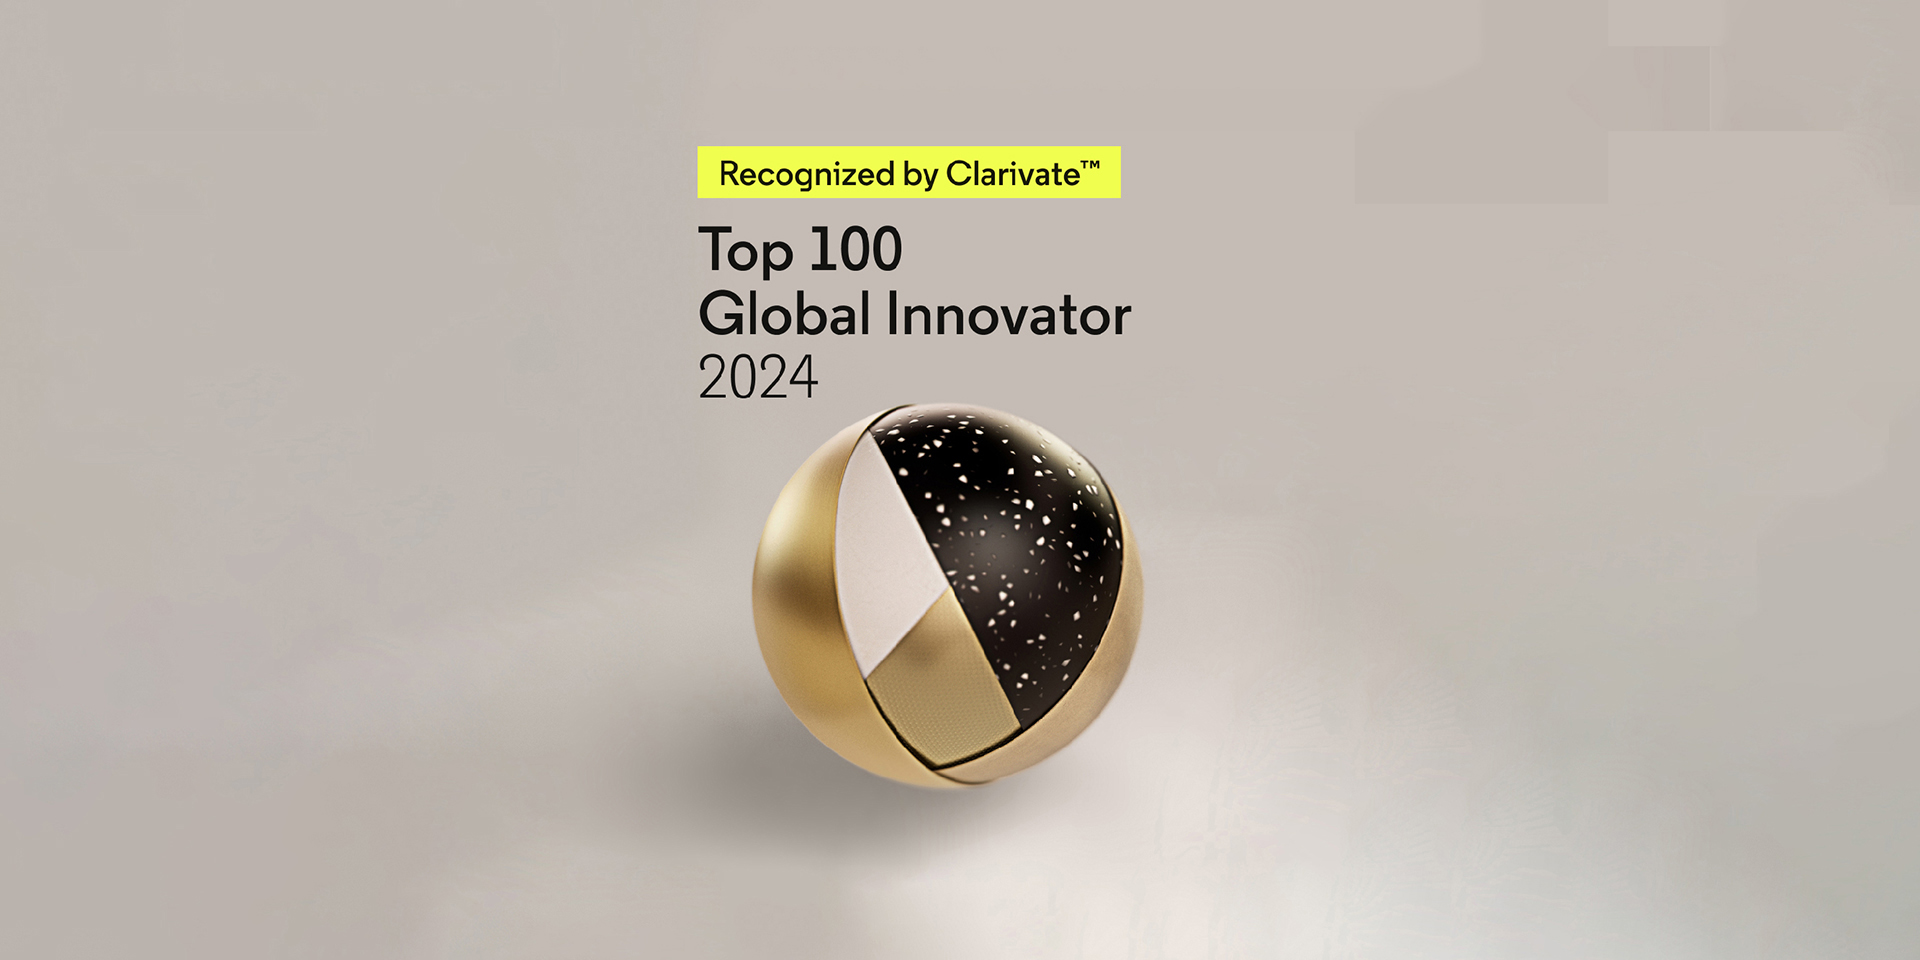 AUO Recognized as Top 100 Global Innovator 2024